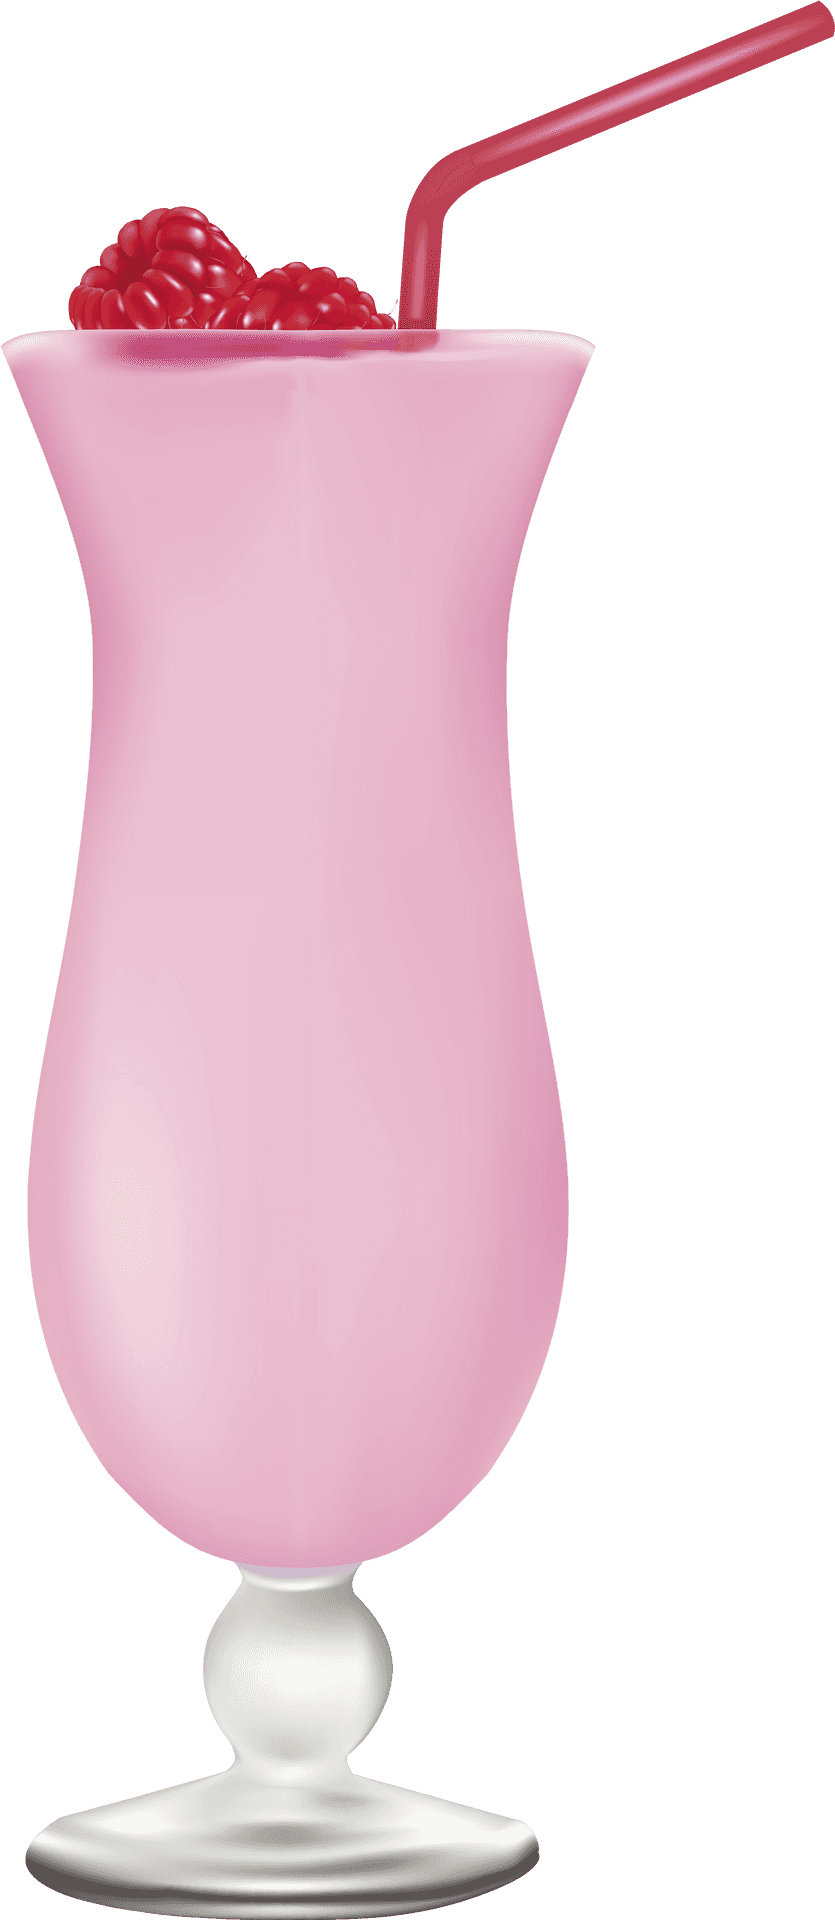 Pink Cocktail Hurricane Glass PNG